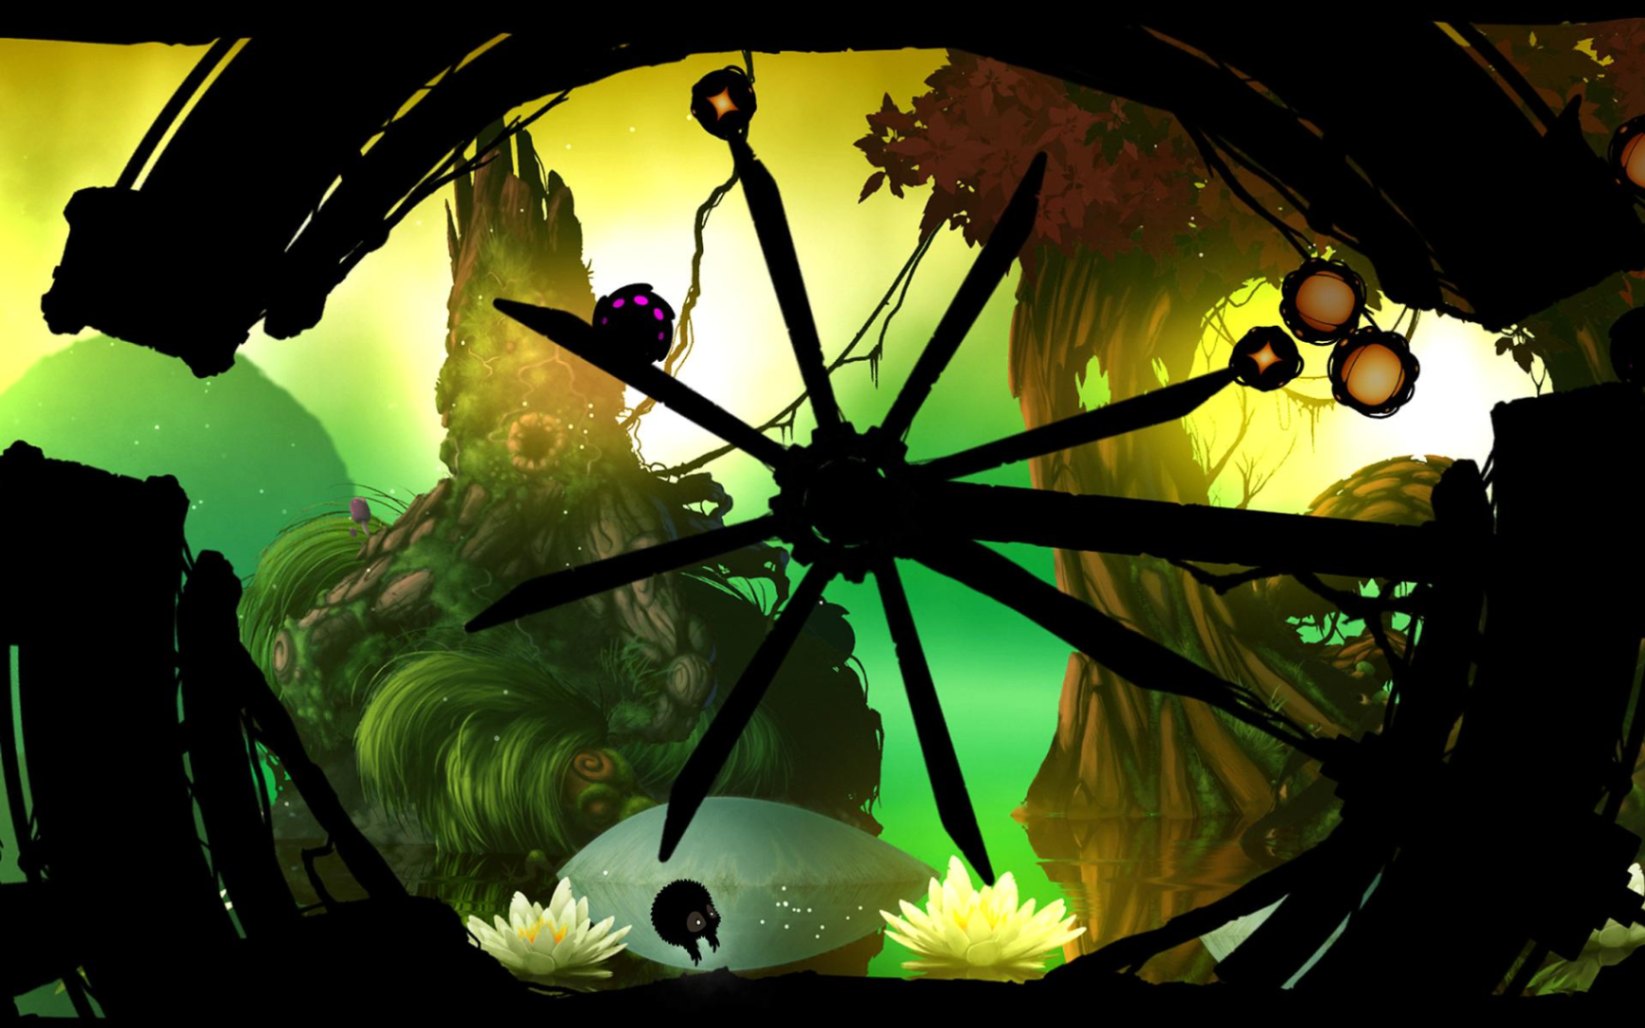 BADLAND - Learn Some Tips, Strategies on How to Play and Much More